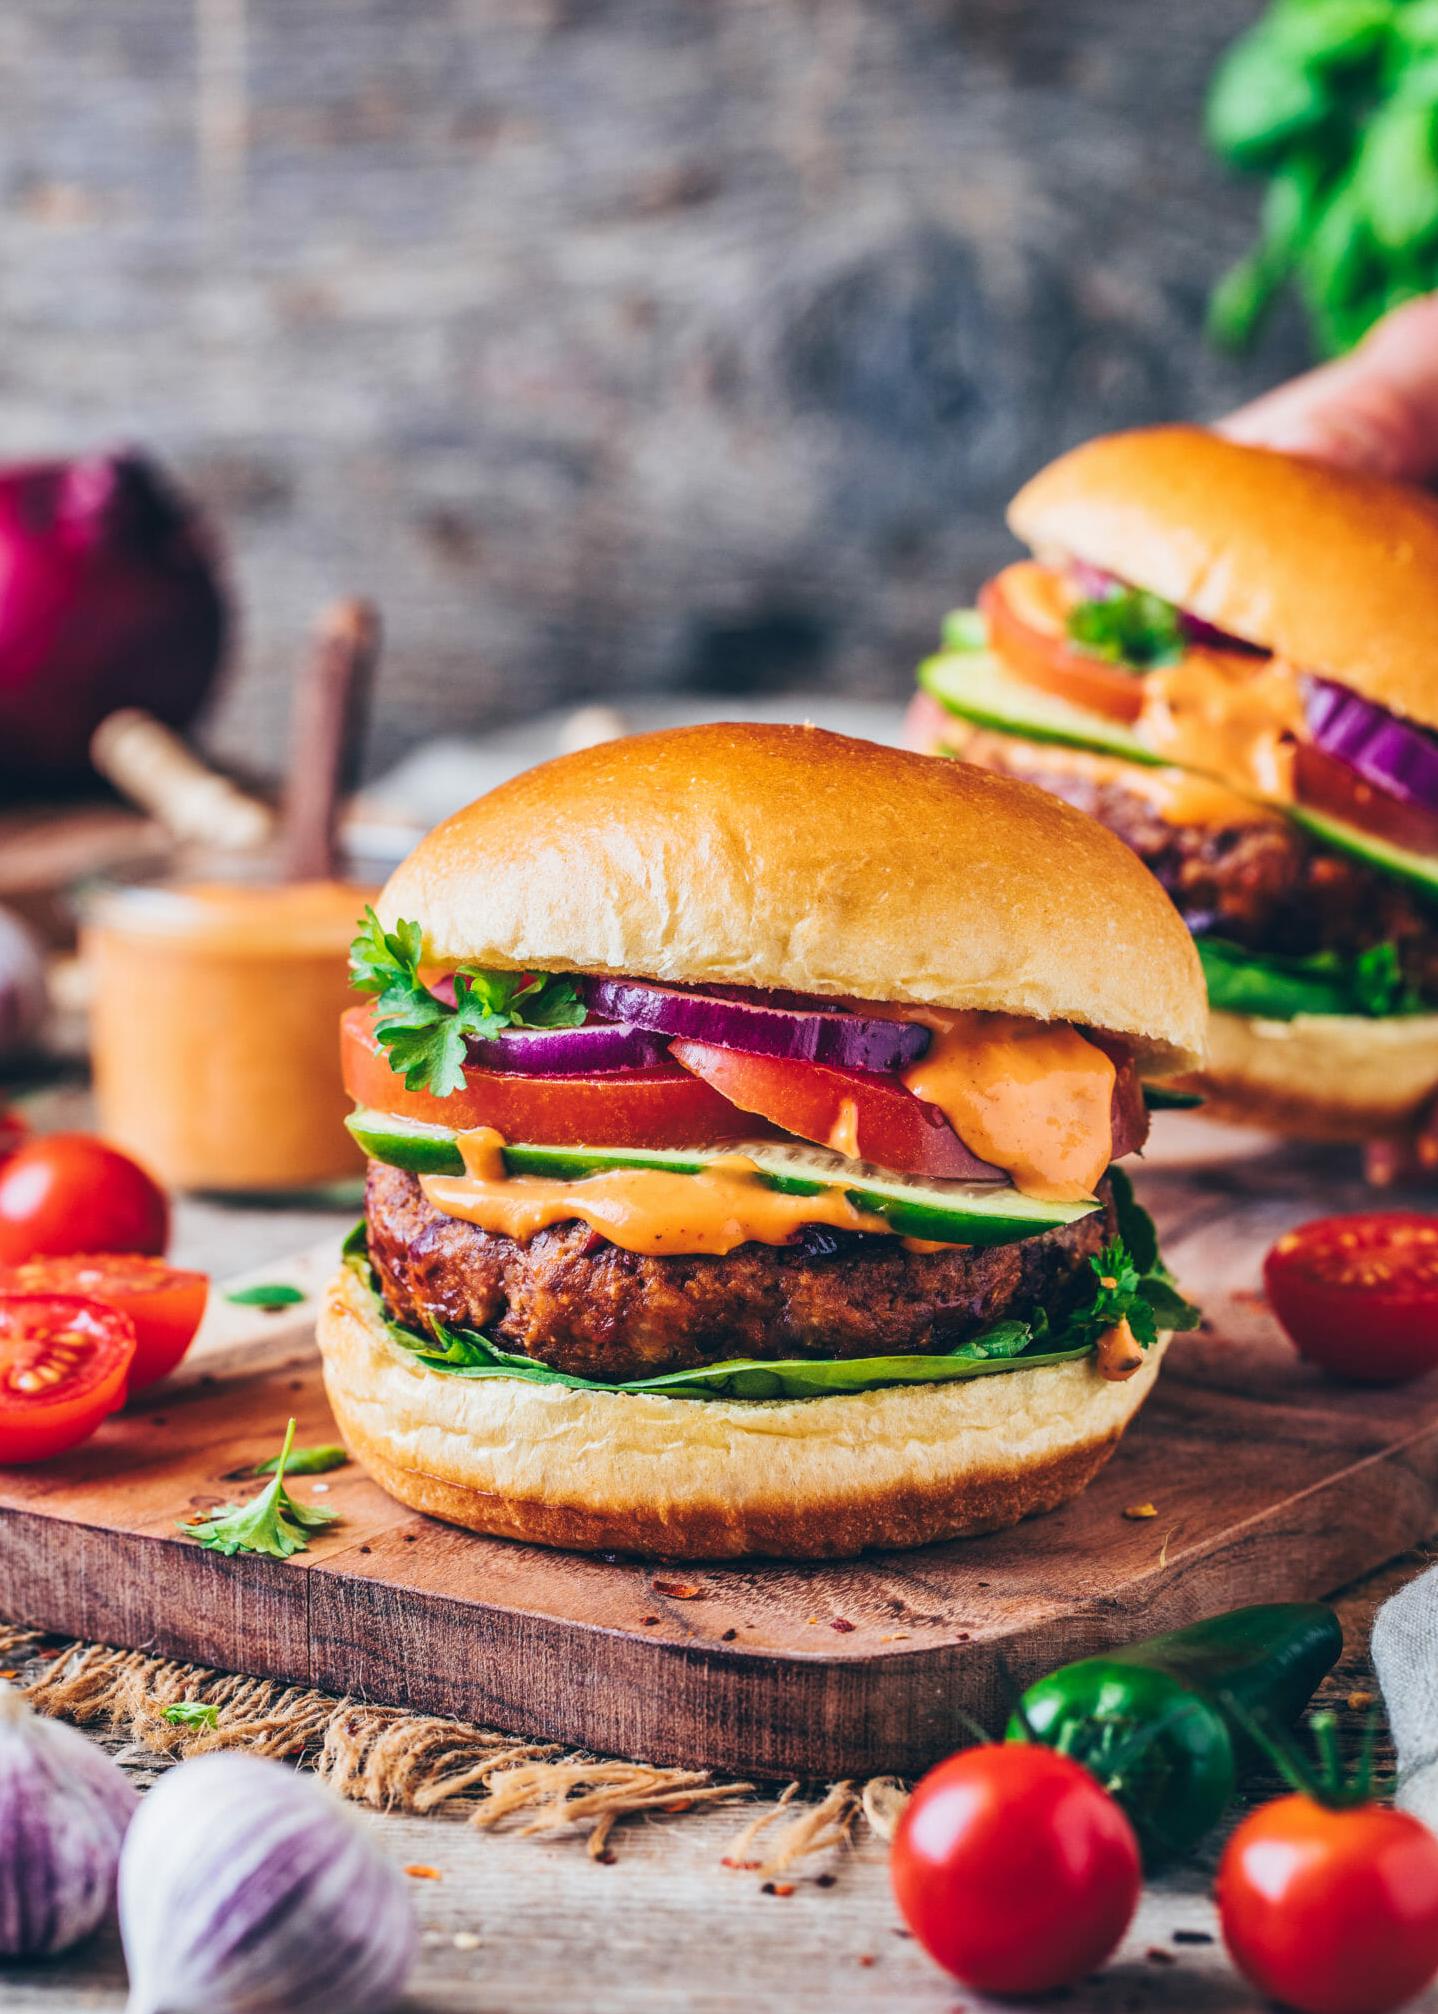  Nothing beats a homemade veggie burger – especially when it's gluten-free and packed with fresh veggies.